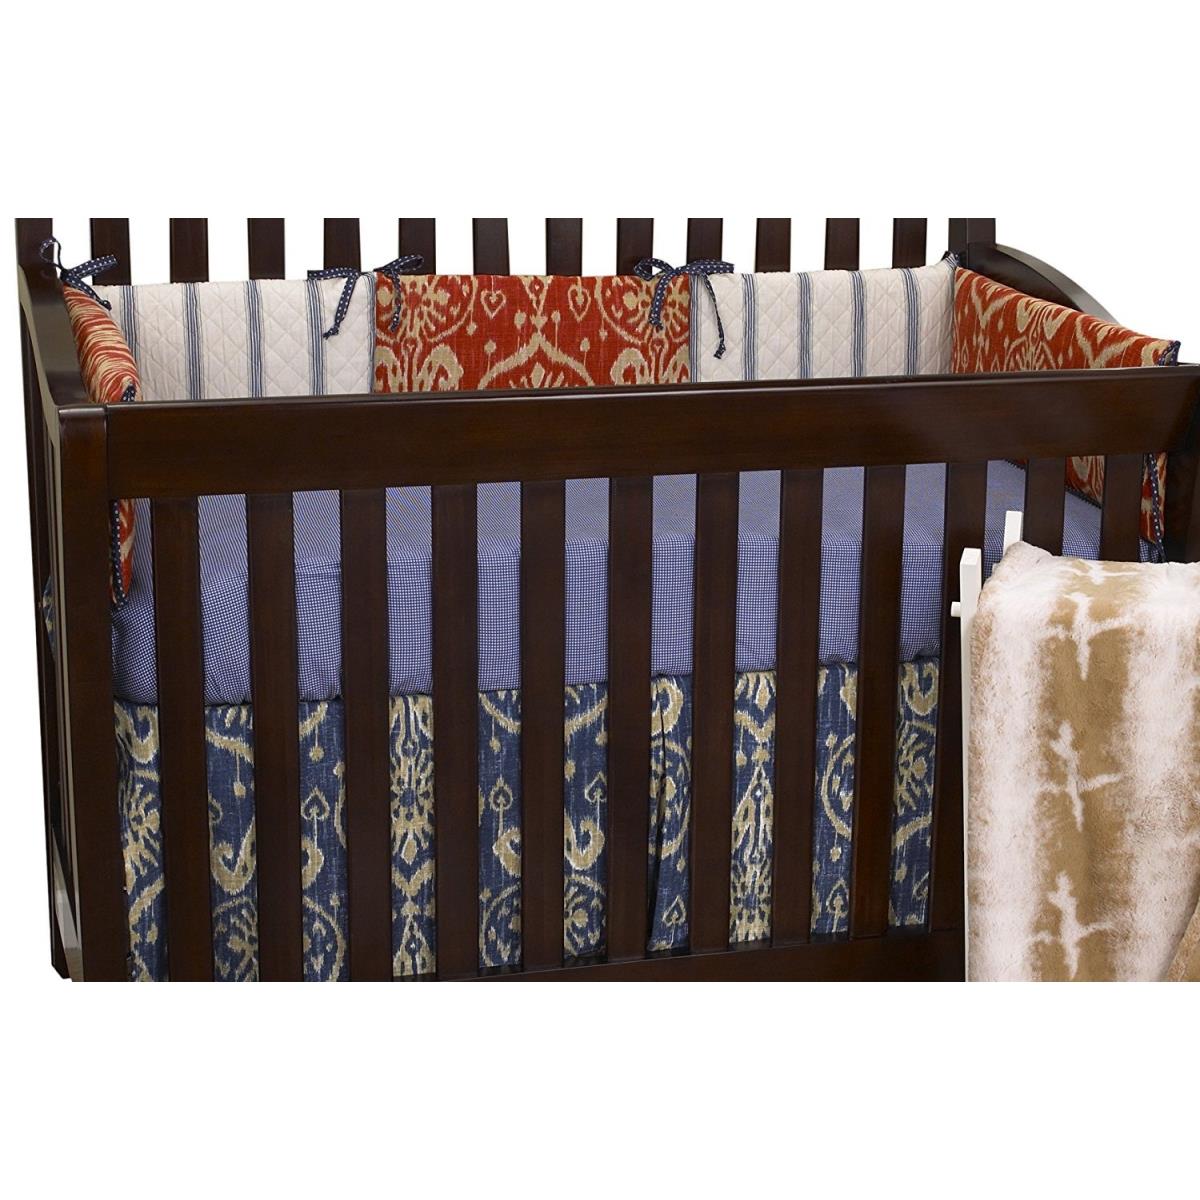 Picture of Cotton Tale SK4S Sidekick Baby Crib Bedding 4 Piece Set